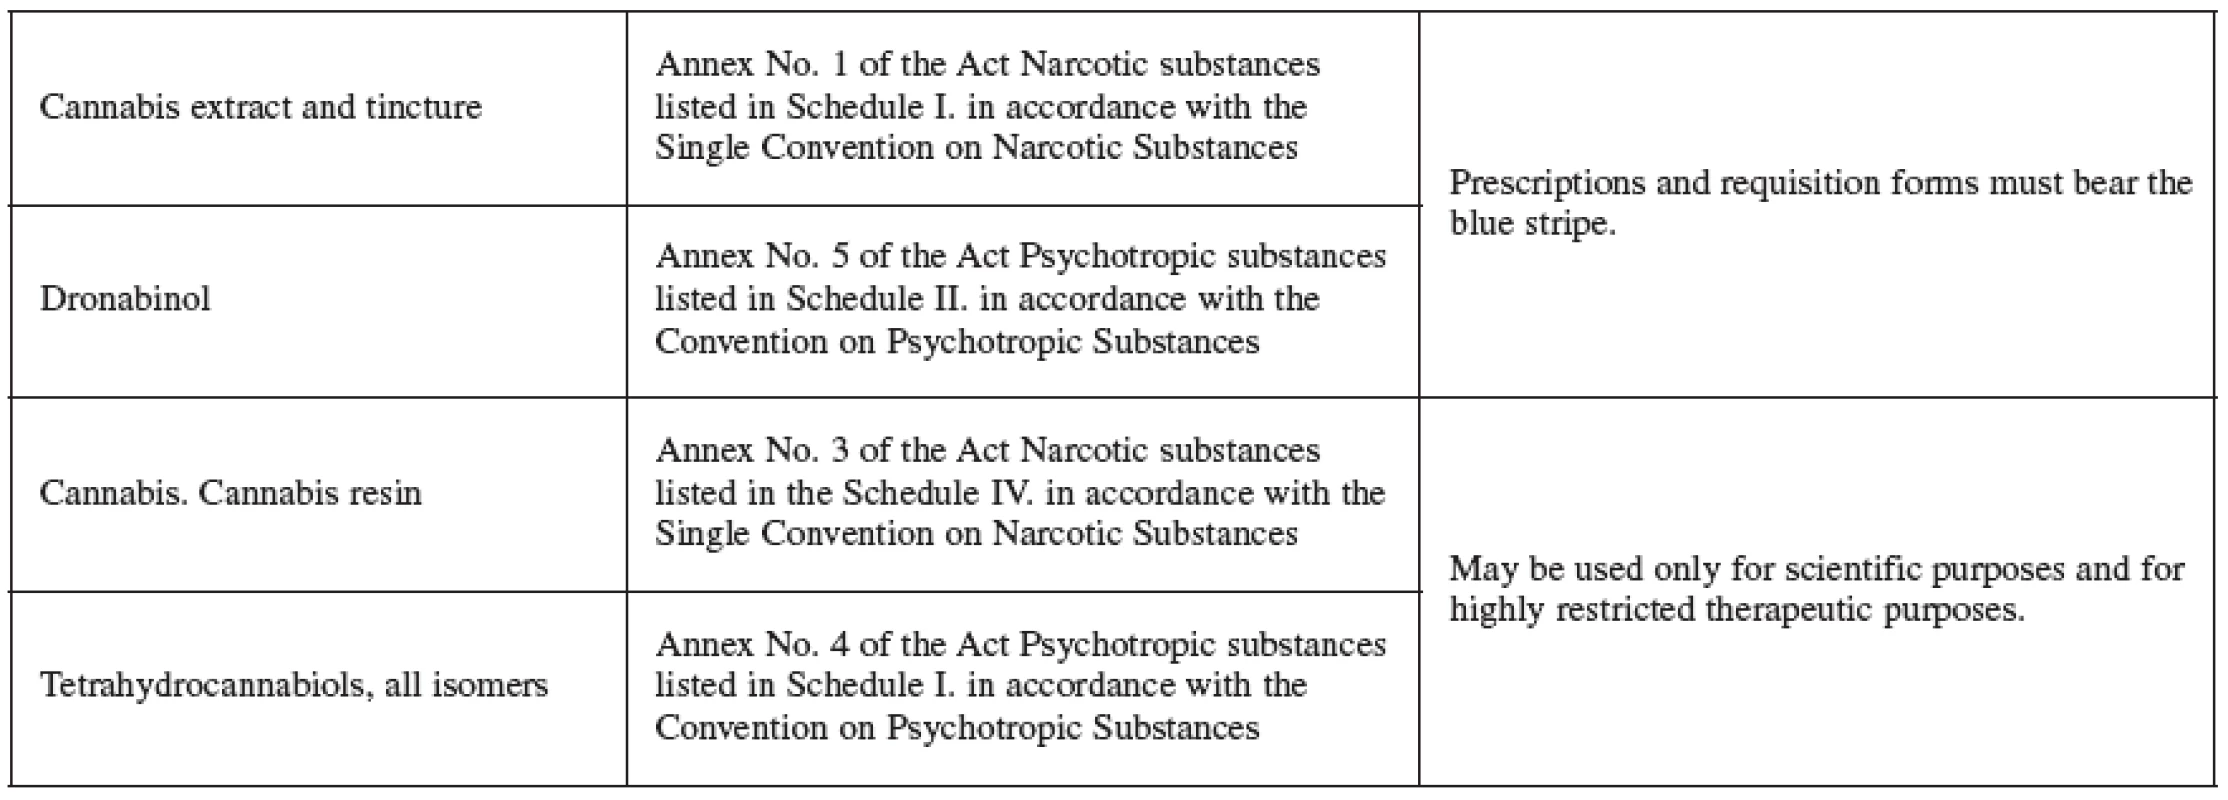 Cannabis products listed per the Addictive Substances Act No.167/1998 of the Register of Laws and Regulations